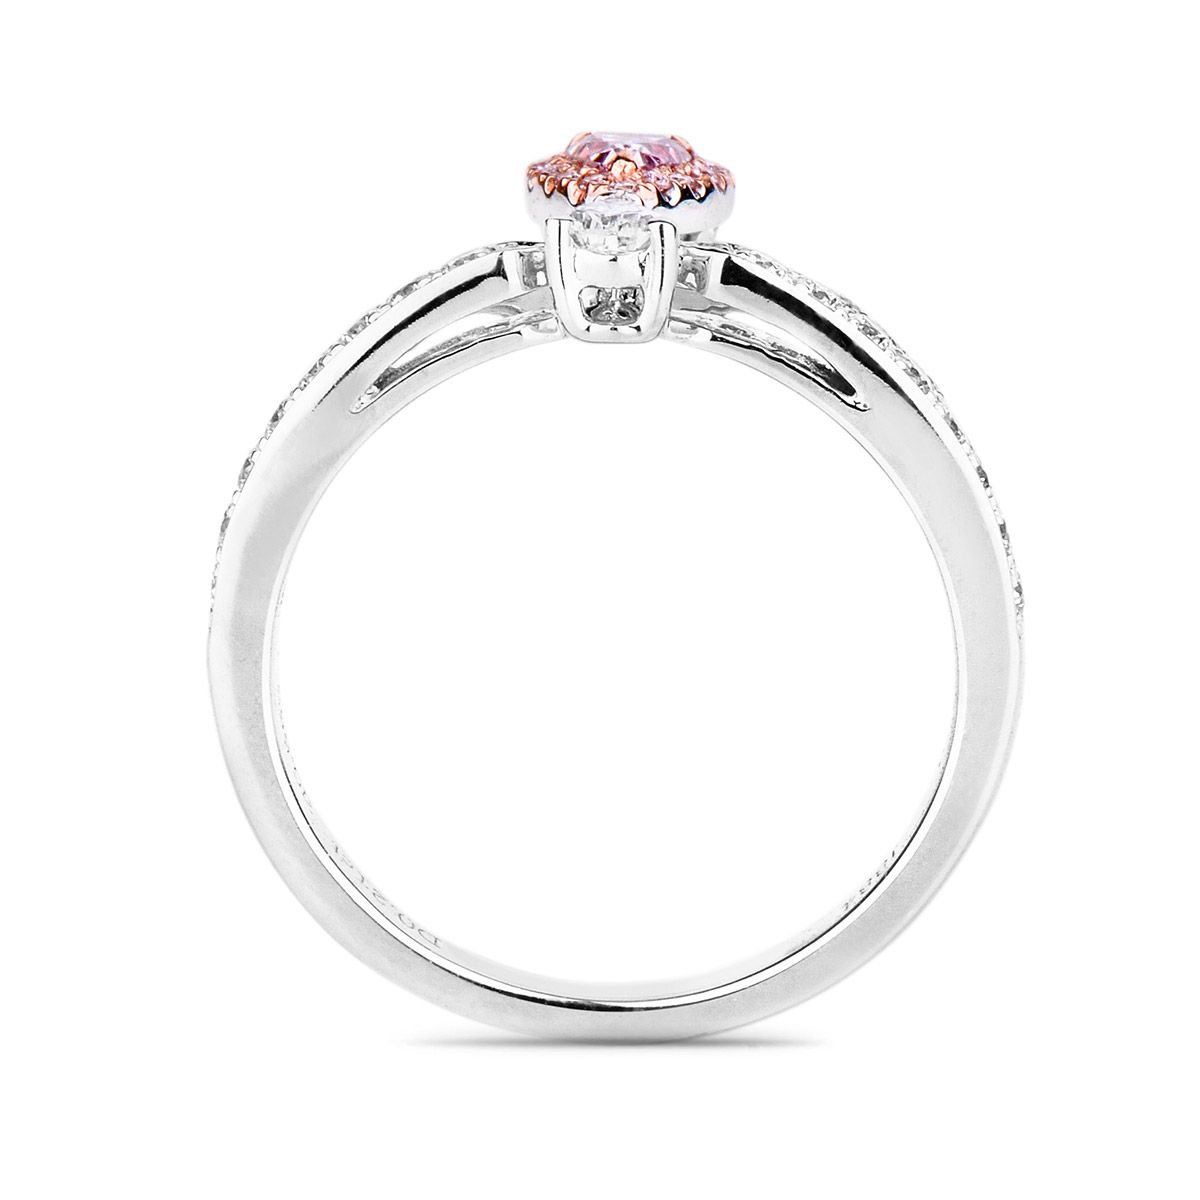 Fancy Brownish Pink Diamond Ring, 0.21 Ct. (0.78 Ct. TW), Pear shape, GIA Certified, 5182226880